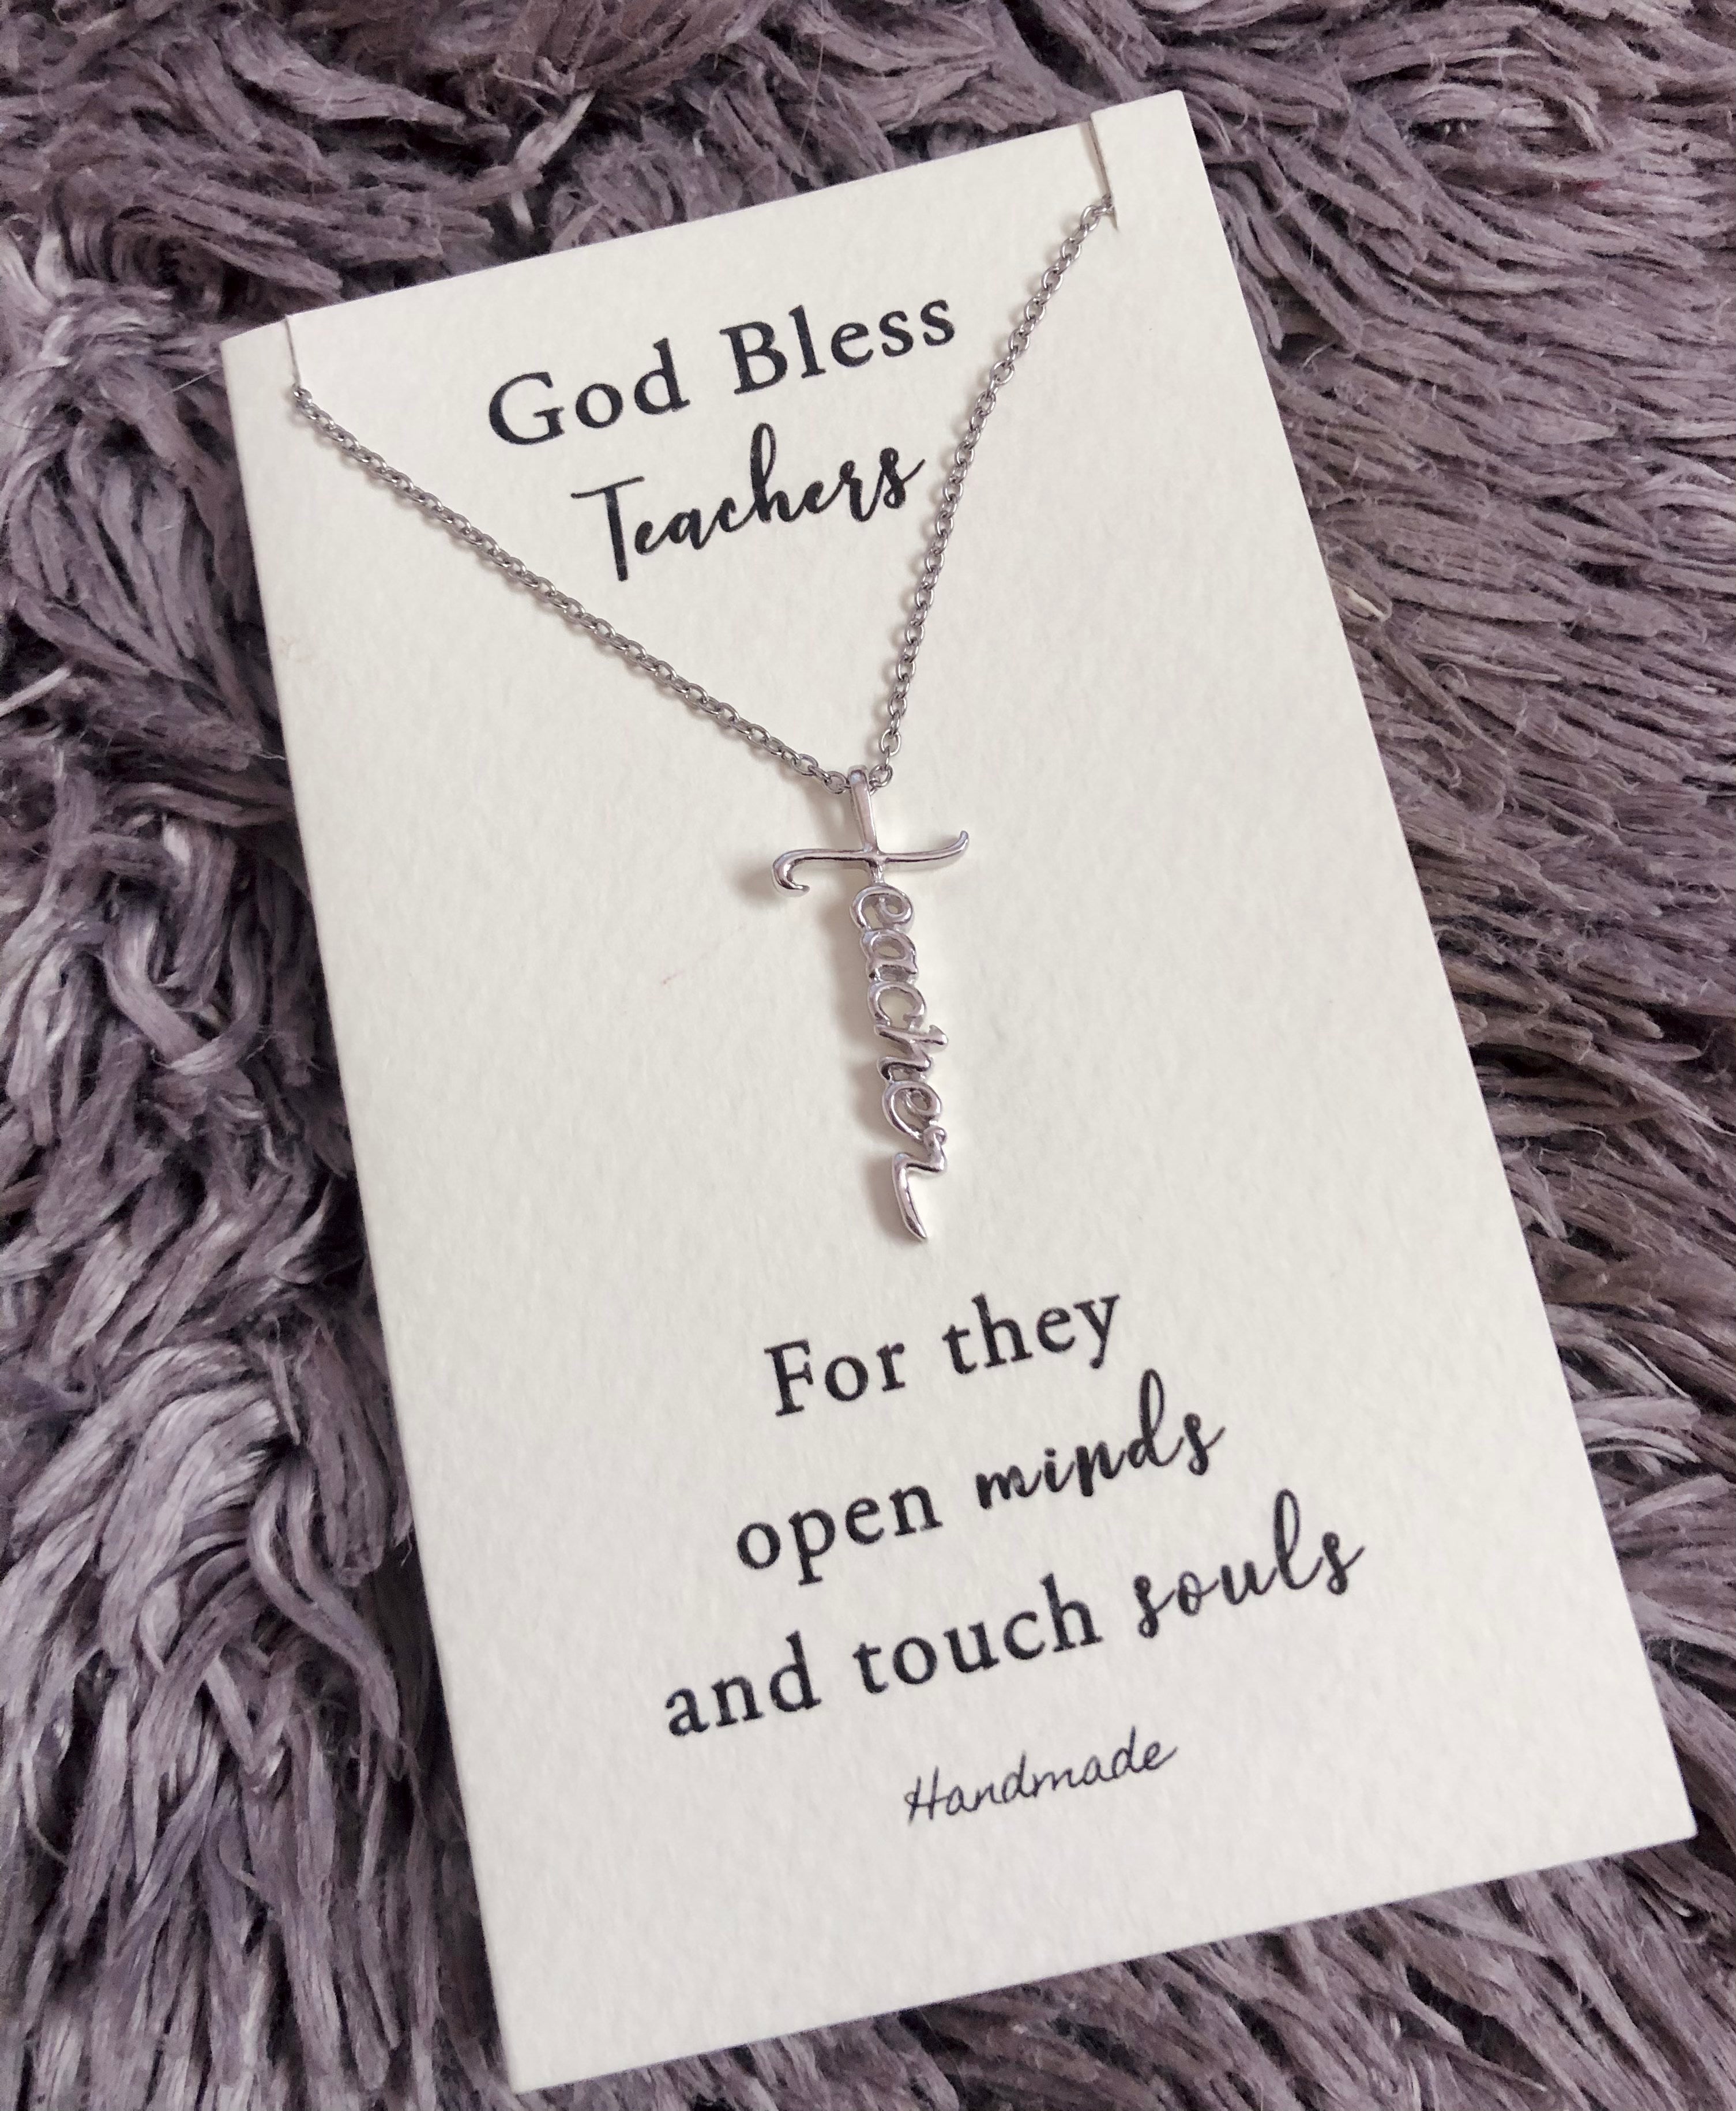 Joyfulle Aaron Teacher Script Pendant Cross Necklace, Handmade Gifts for Teachers with Inspirational Quotes on Greeting Card, Rhodium Plated